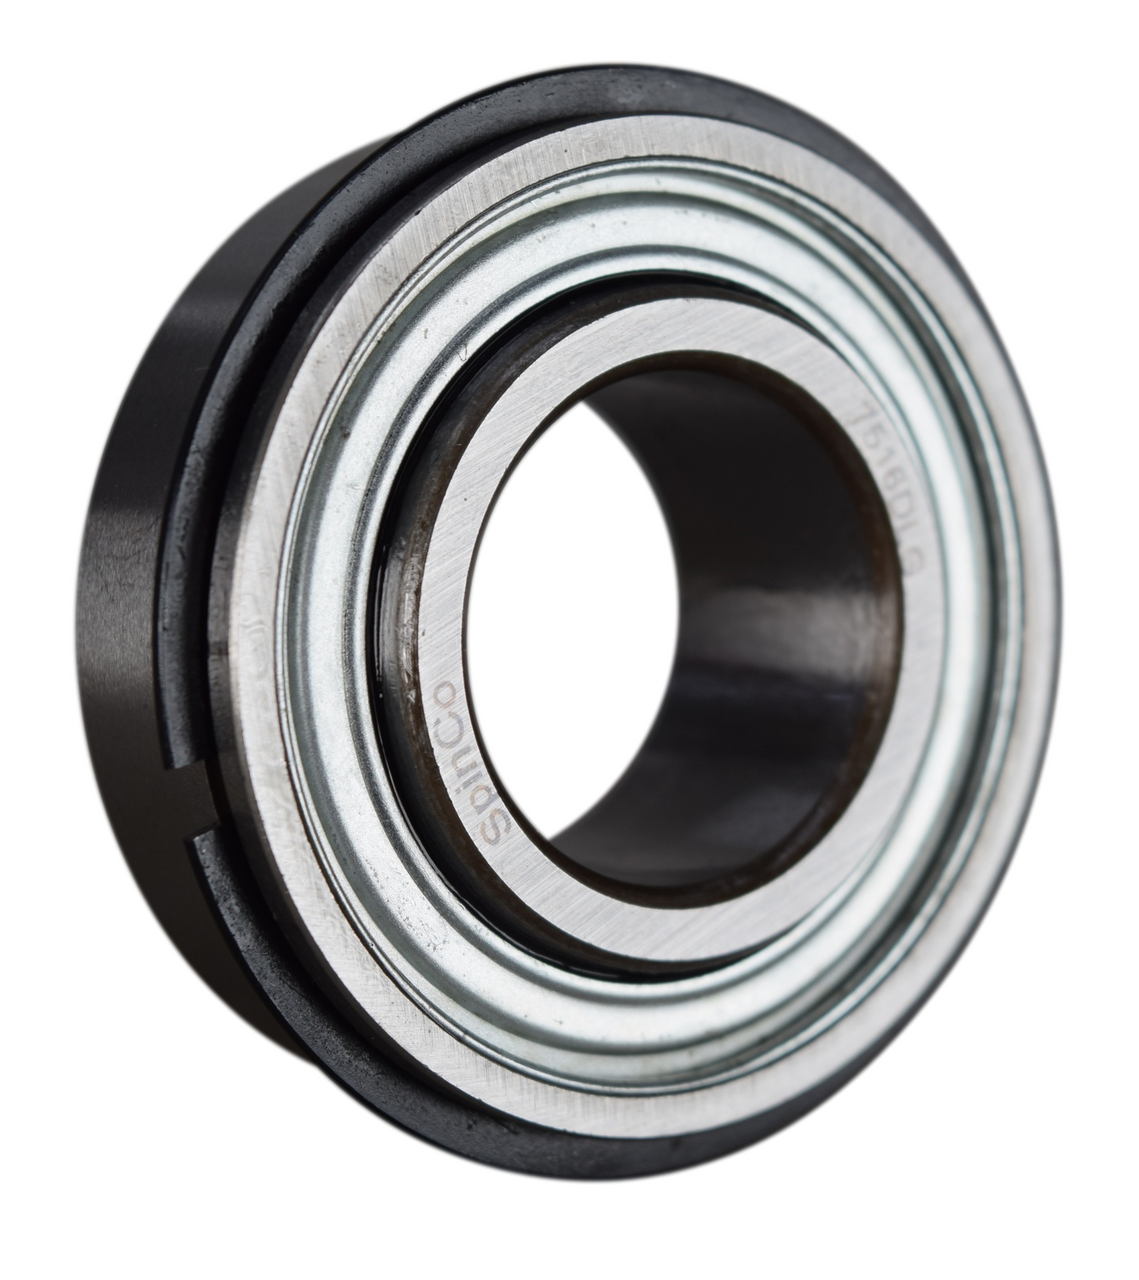 7512DLG GENERIC 0.75x1.75x0.625/0.75 Normal duty bearing insert with a parallel outer race with snap ring and groove - Imperial Thumbnail